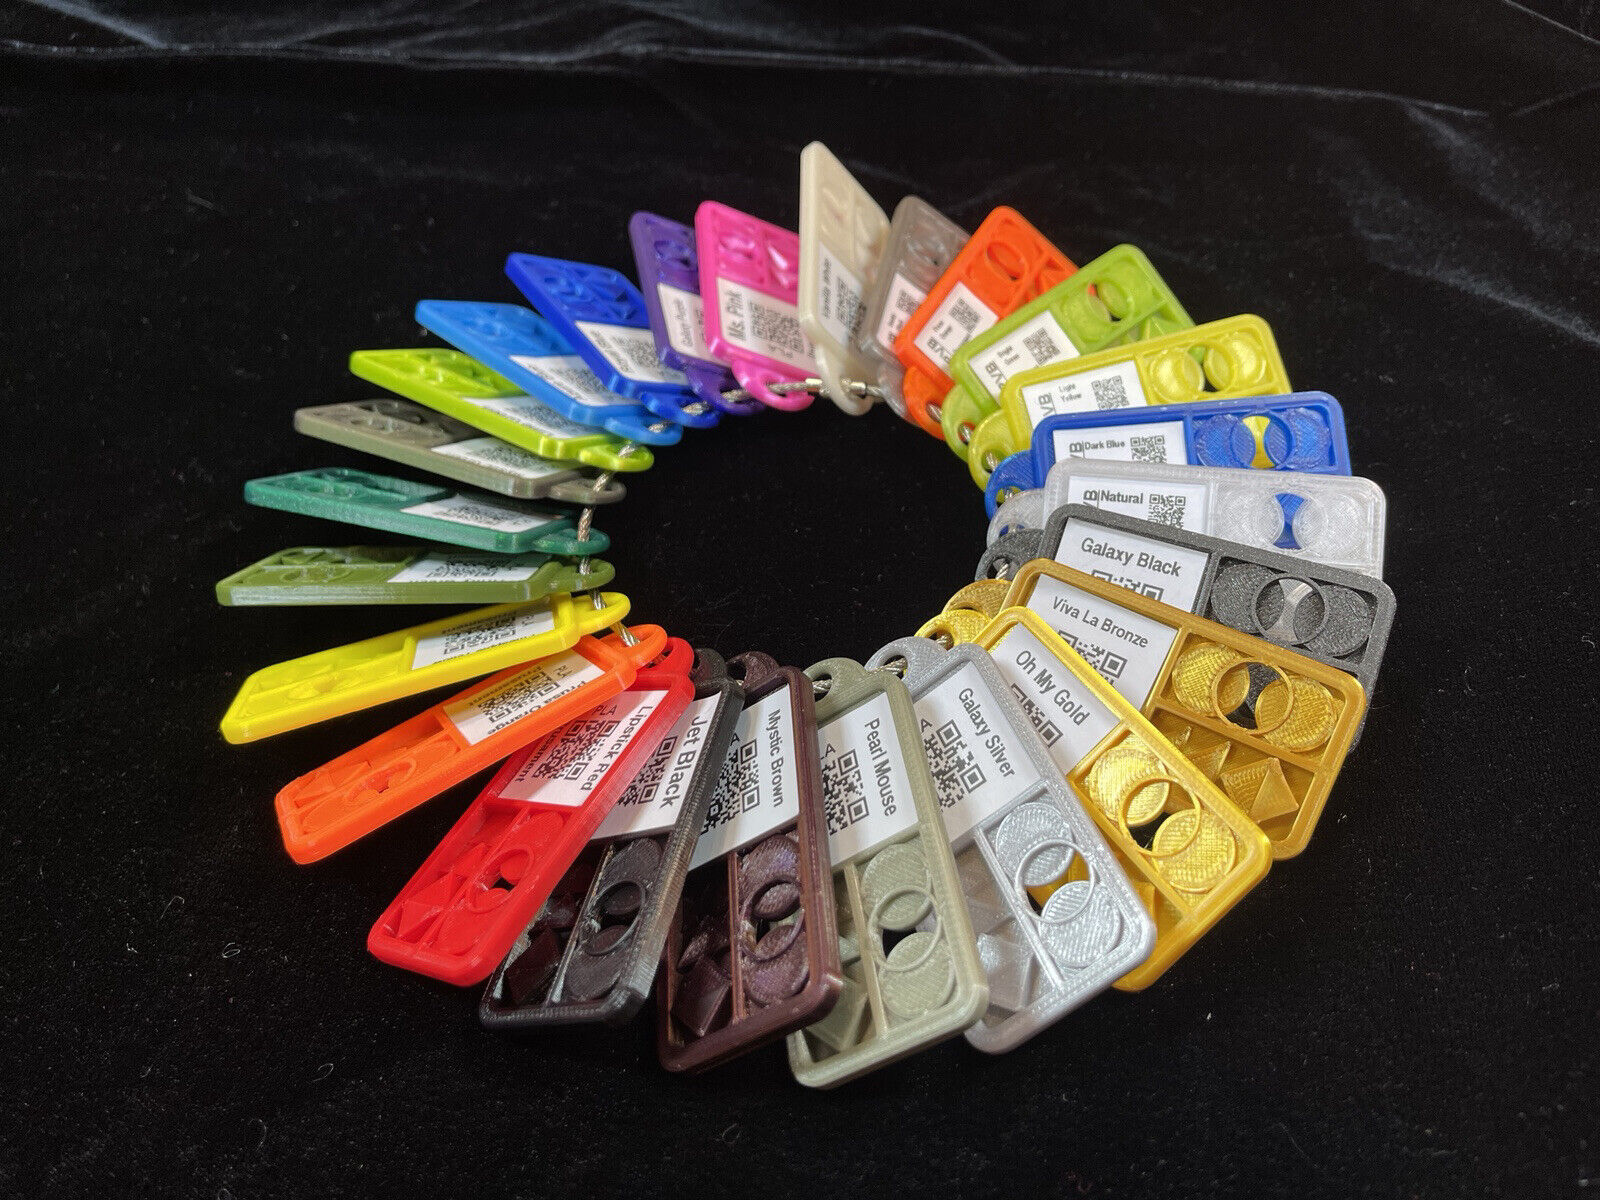 NEW! Prusament Color Swatches Of PLA And PVB - 25 Swatches!